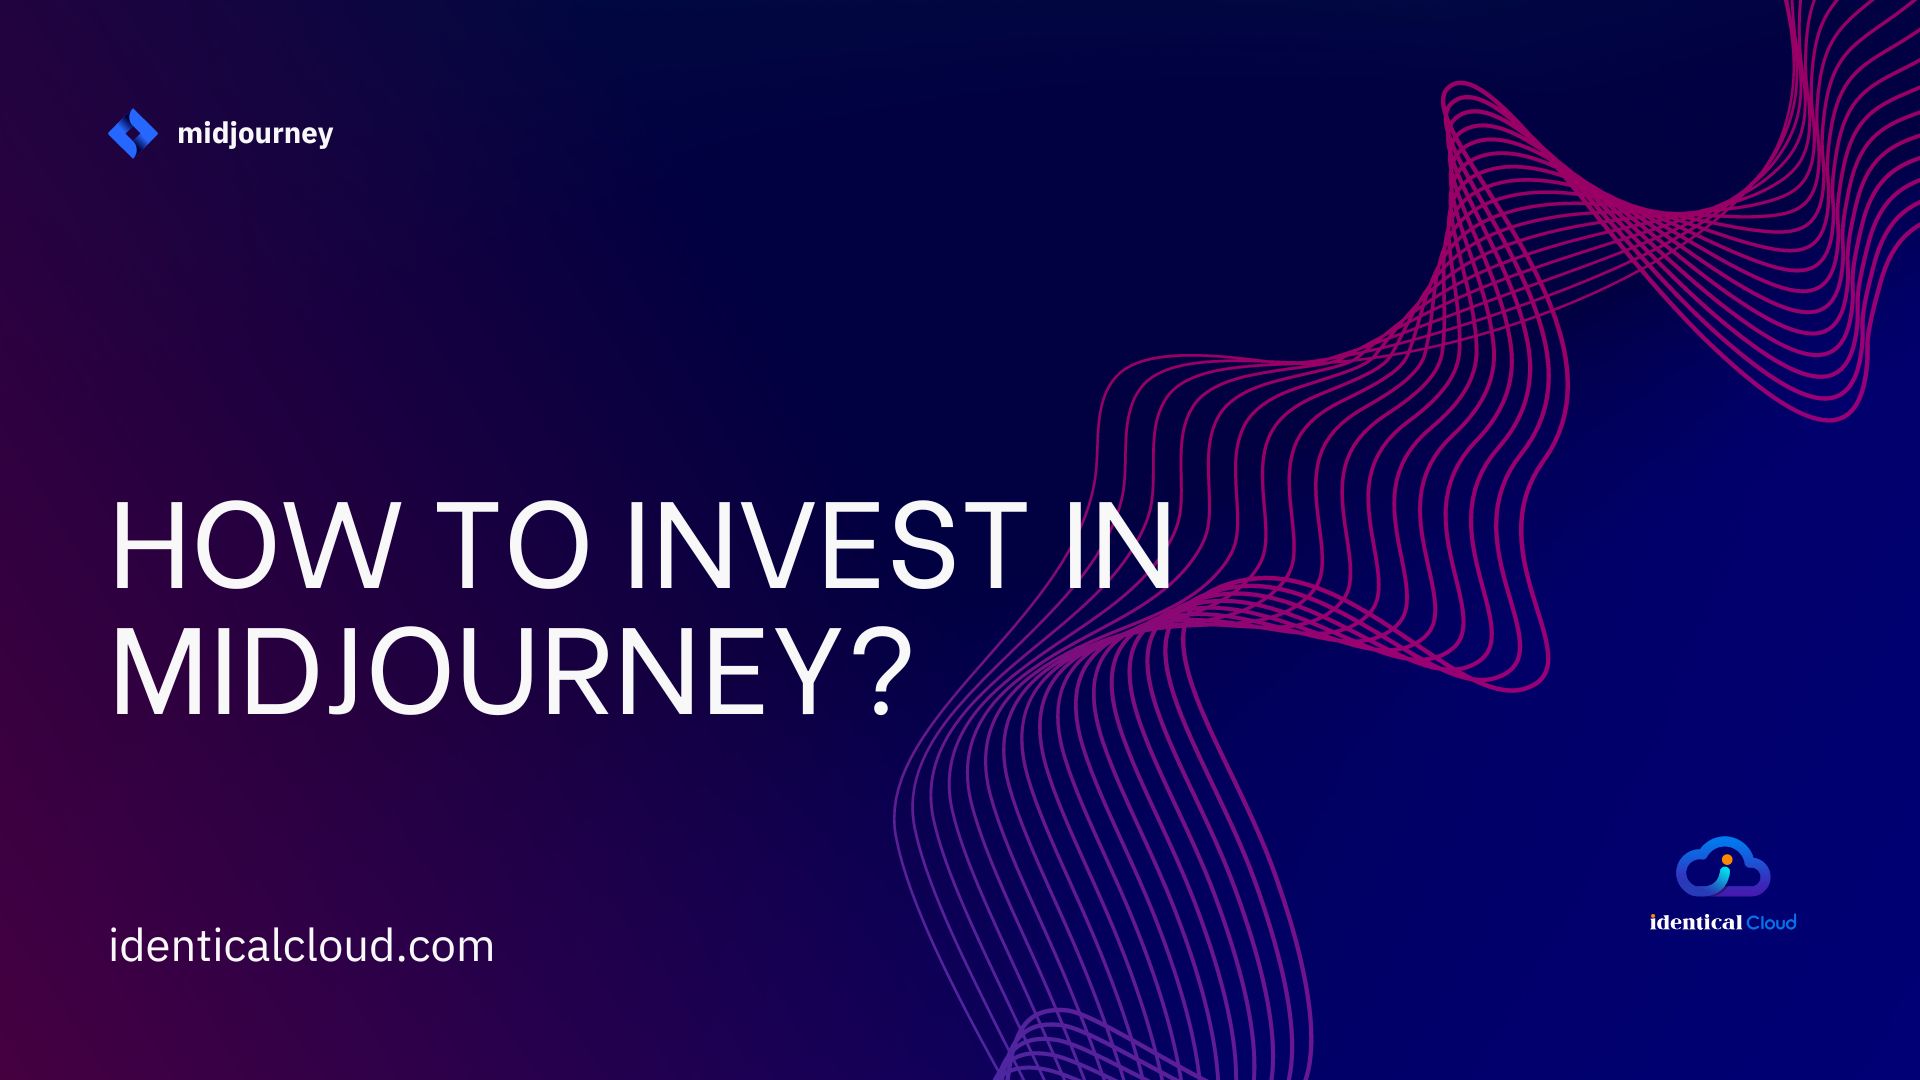 How to invest in midjourney? - identicalcloud.com